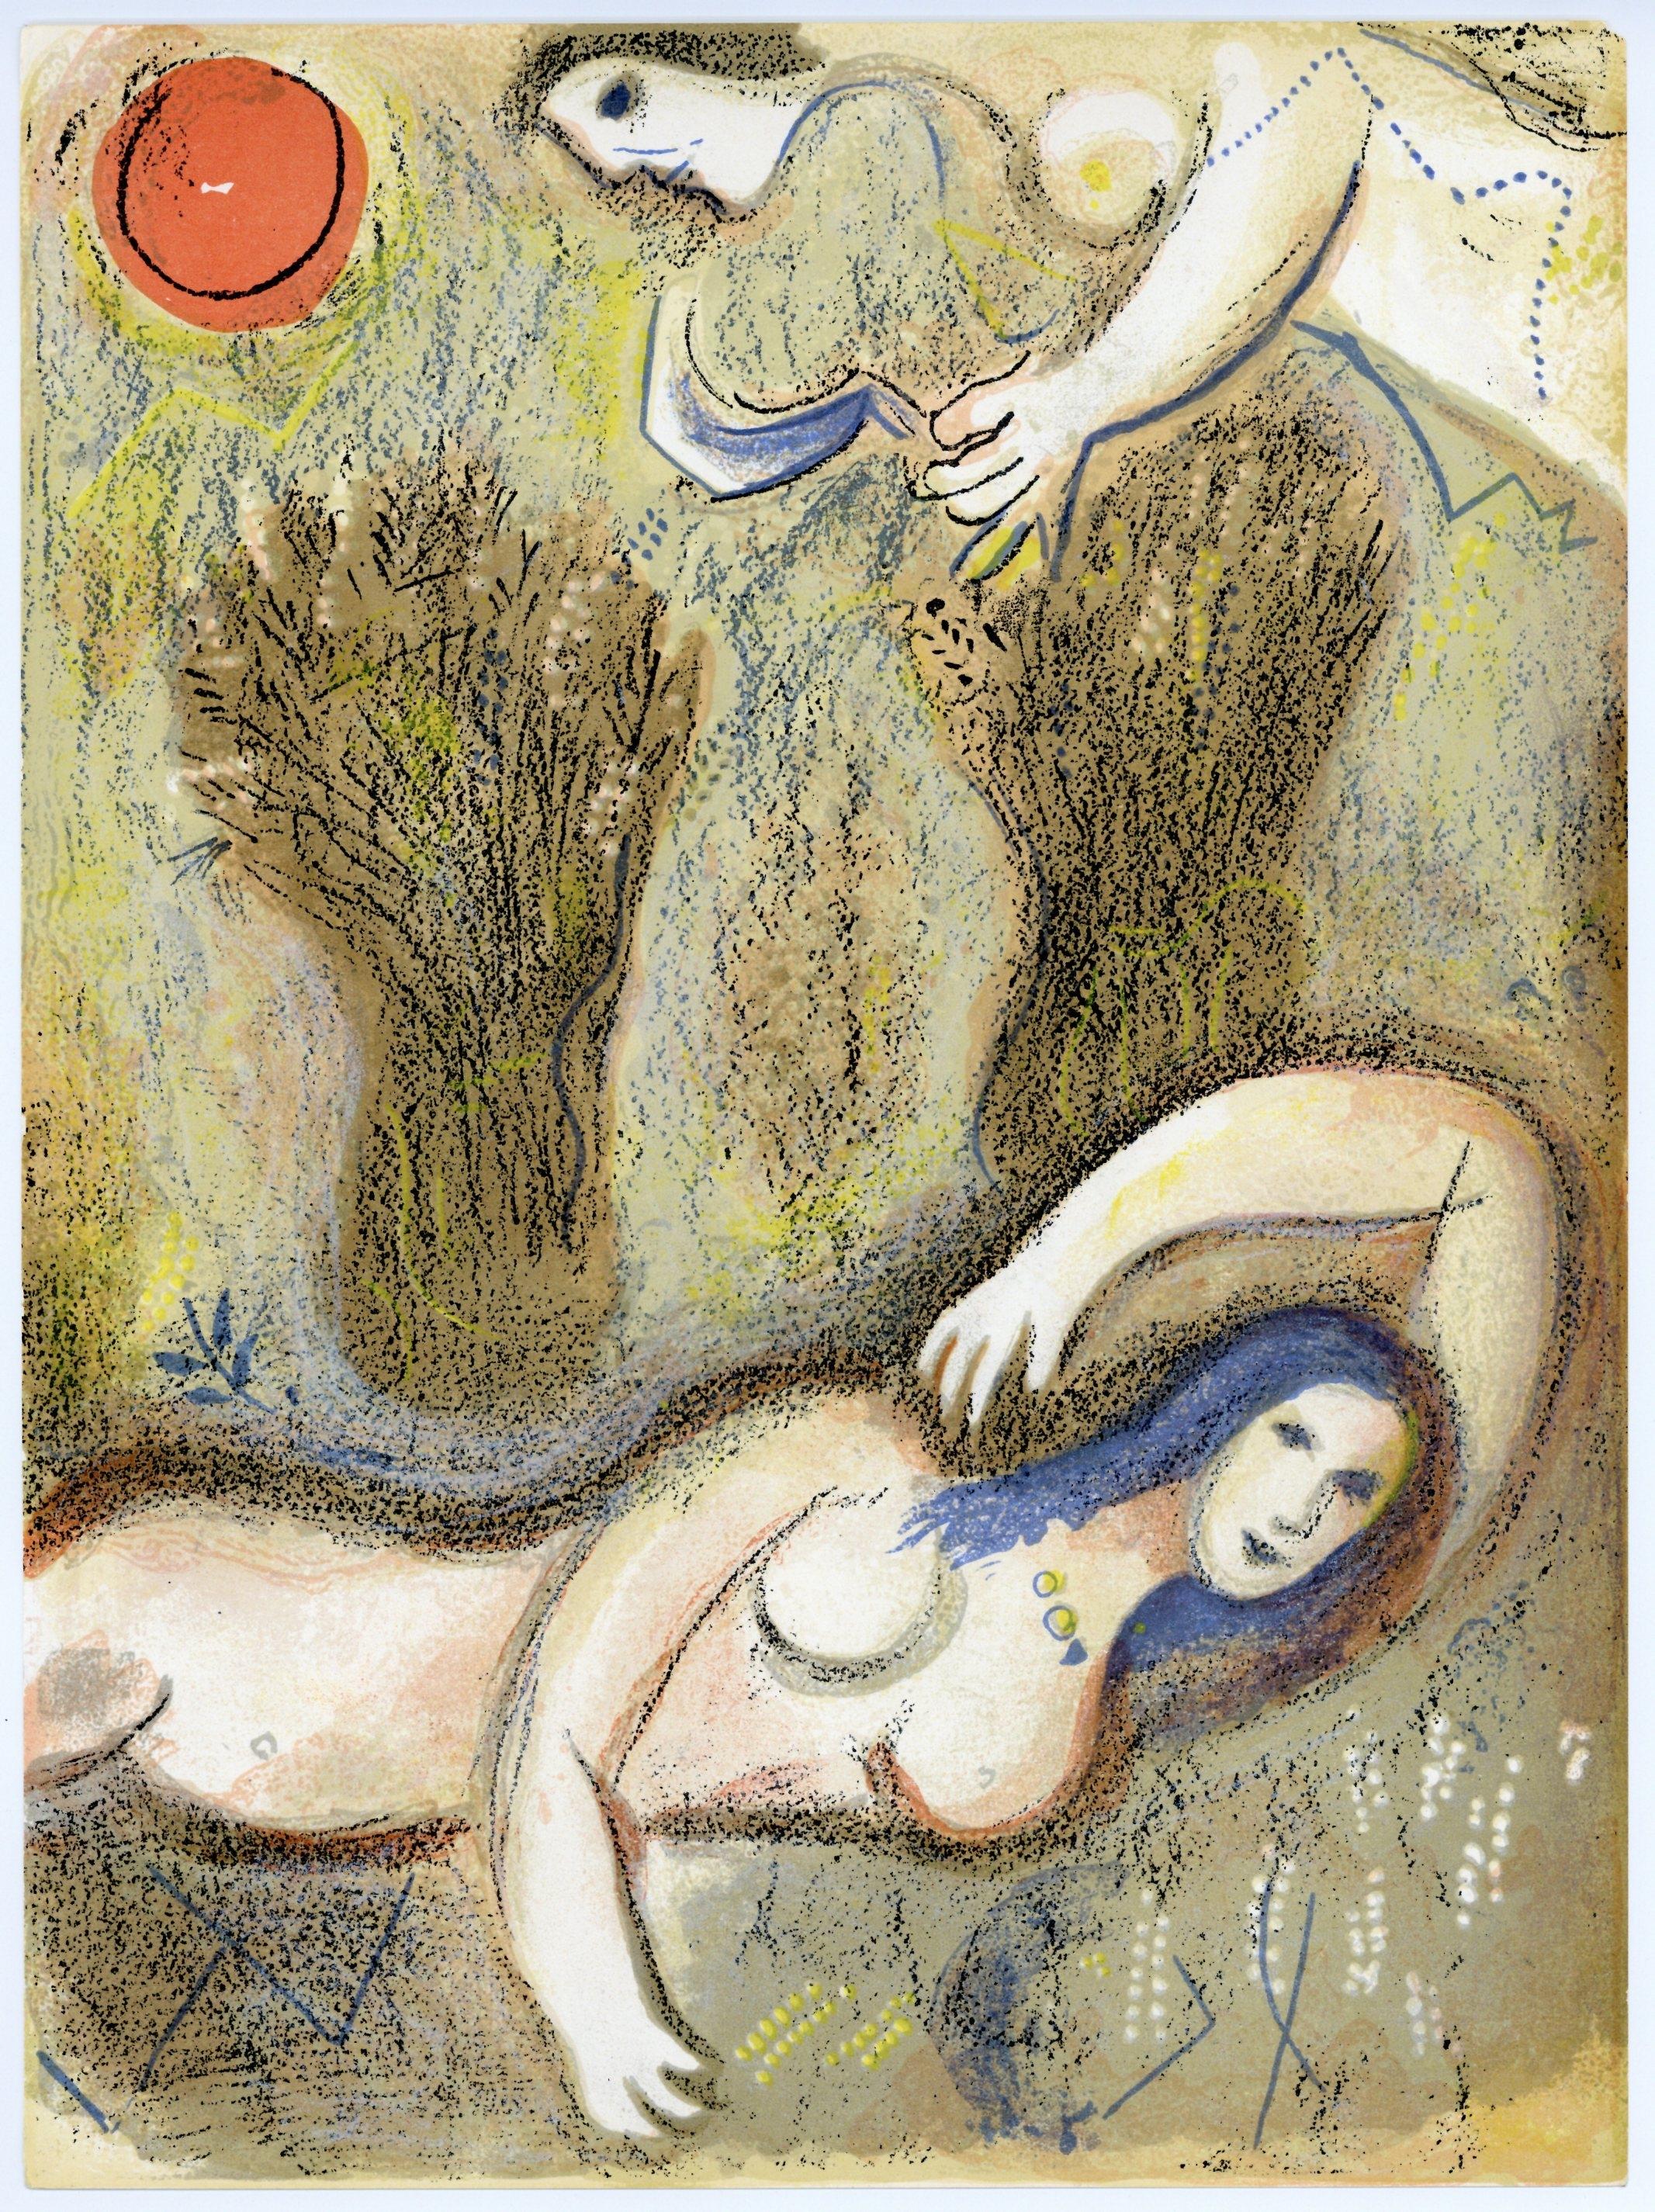 Marc Chagall Portrait Print - "Boaz wakes up and sees Ruth at his feet" original lithograph